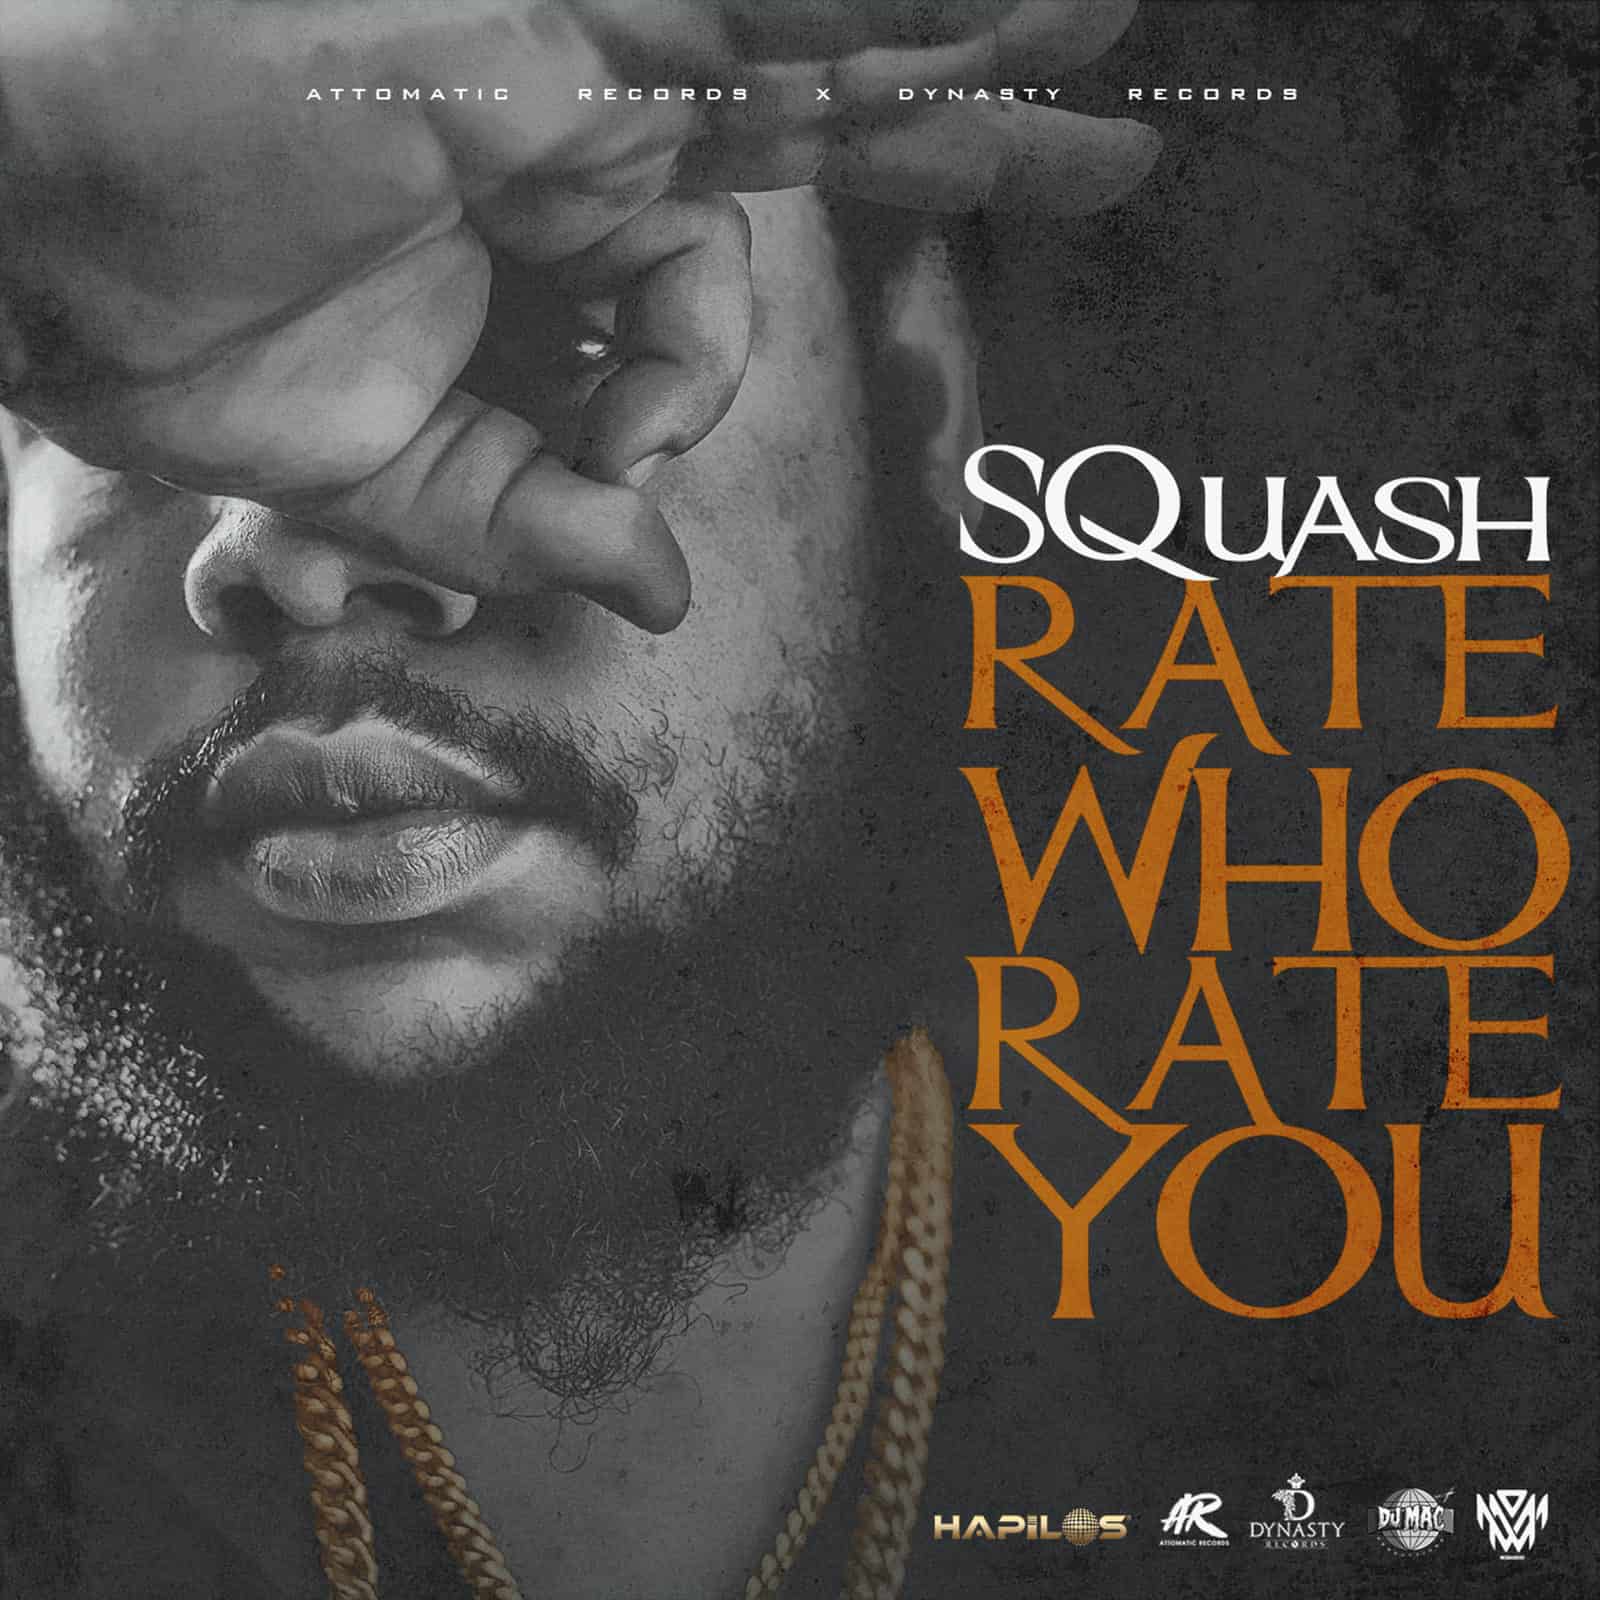 SQUASH - Rate Who Rate You - Dynasty Entertainment Group / Attomatic Records